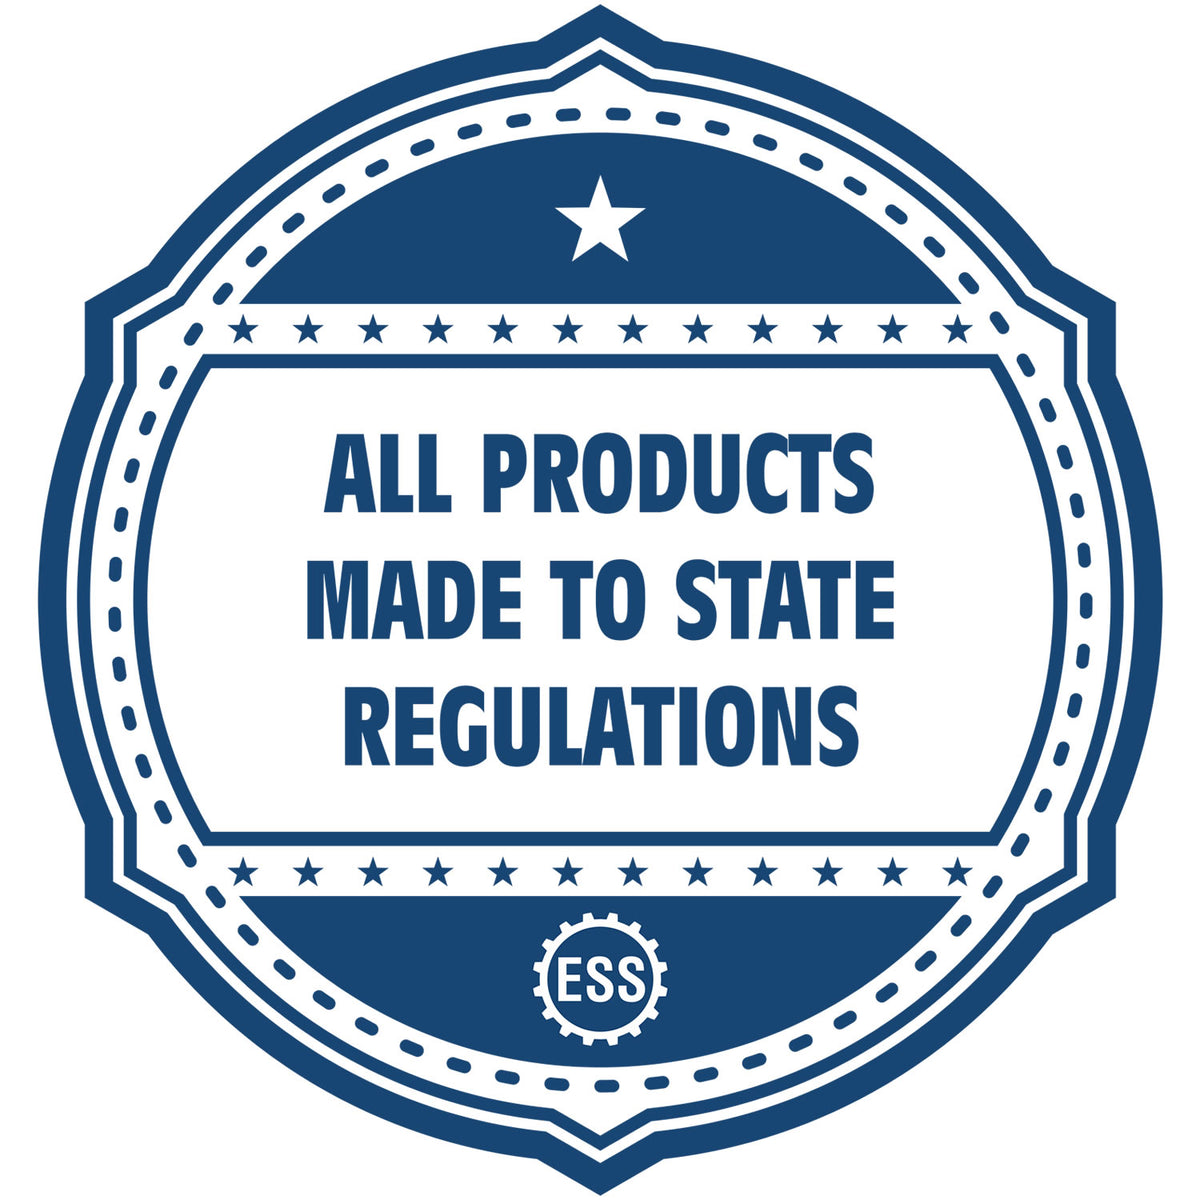 A blue icon or badge for the Self-Inking Utah Geologist Stamp showing that this product is made in compliance with state regulations.